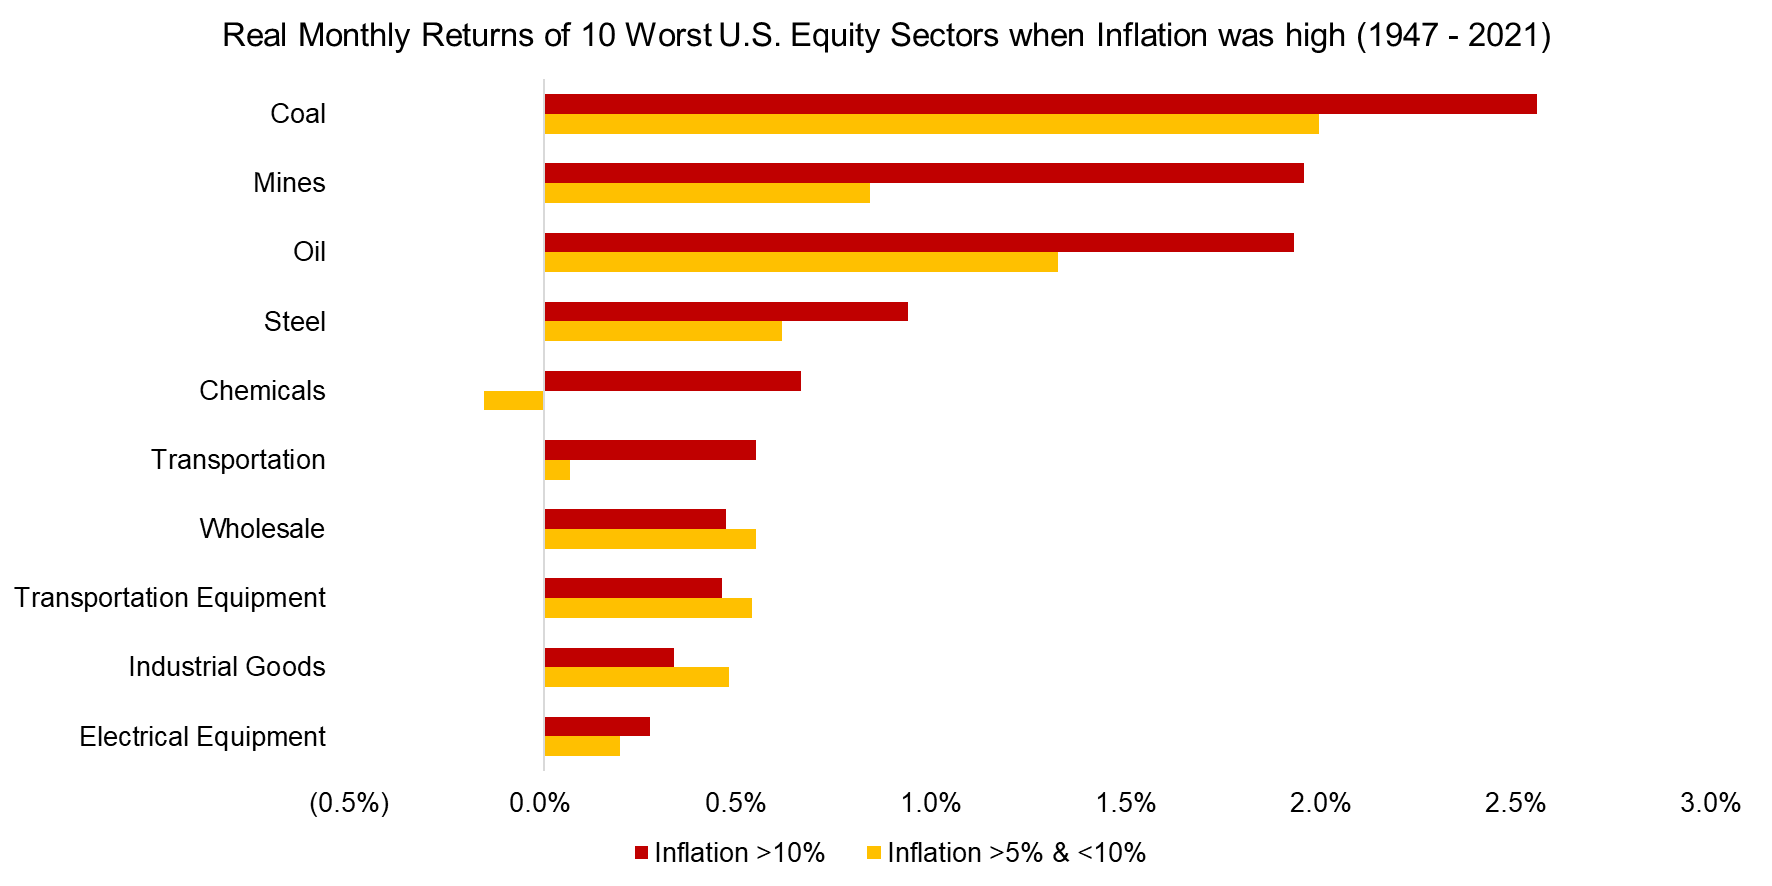 Real Monthly Returns of 10 Best U.S. Equity Sectors when Inflation was high (1947 - 2021)